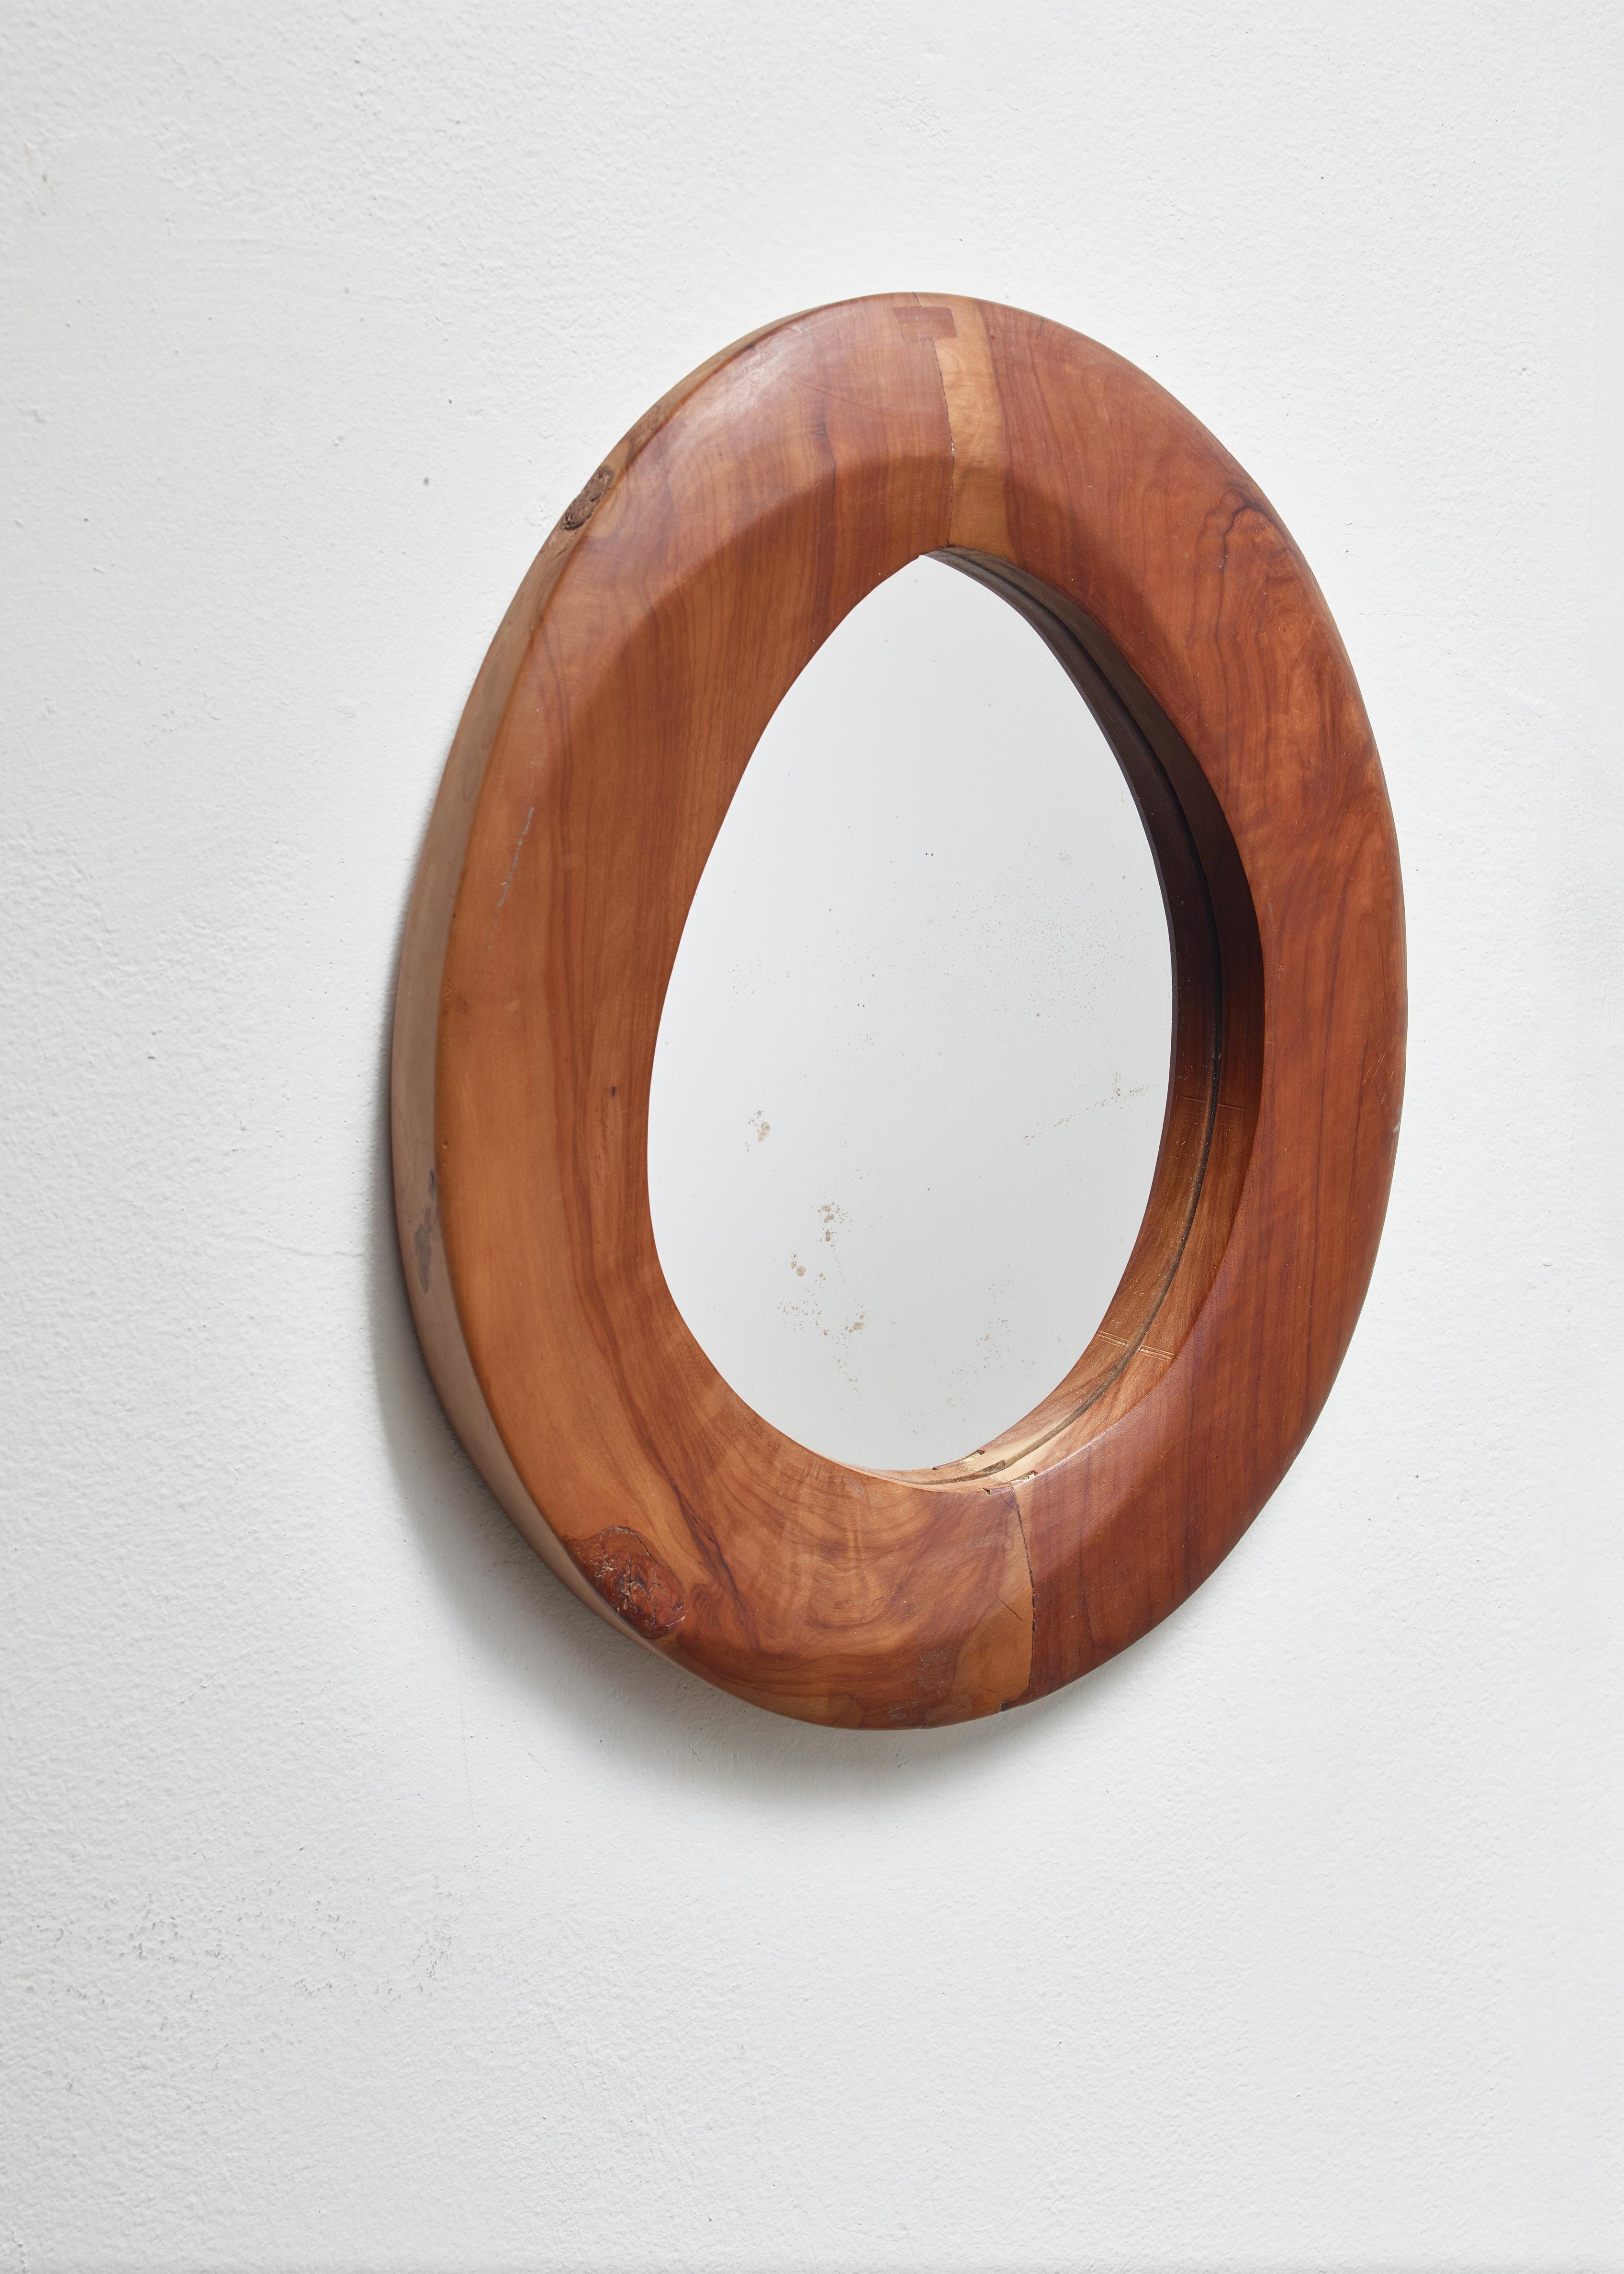 French Free-Form Wooden Mirror, France, 1950s For Sale